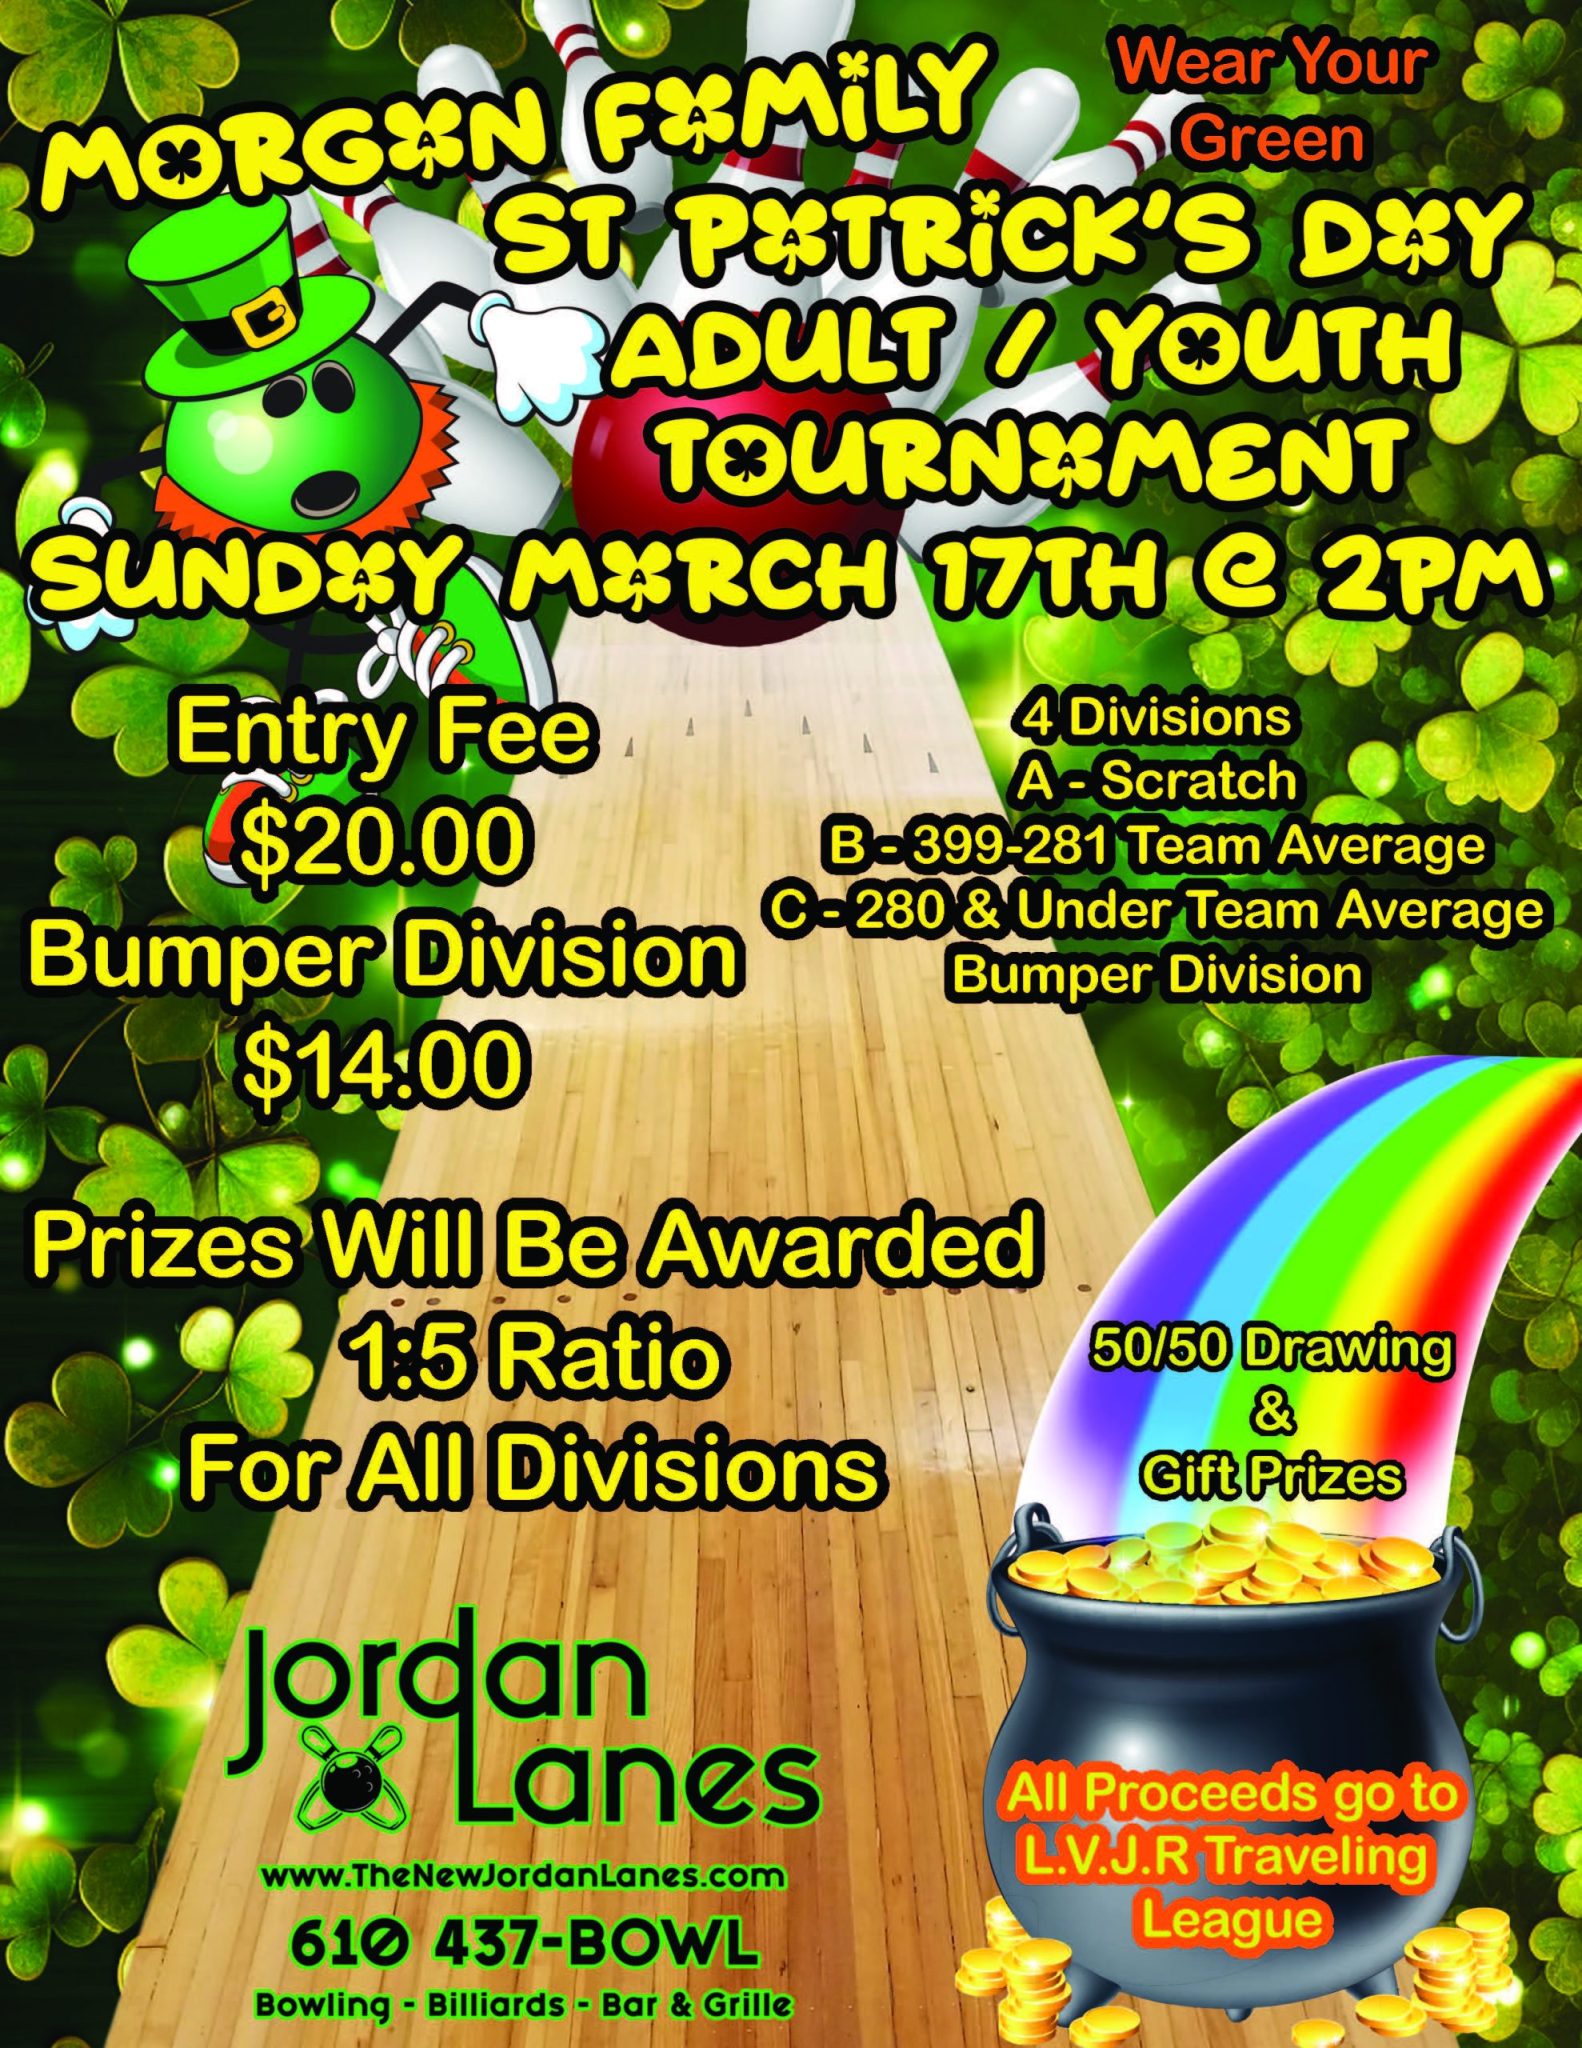 Morgan Family Adult / Youth Tournament 24